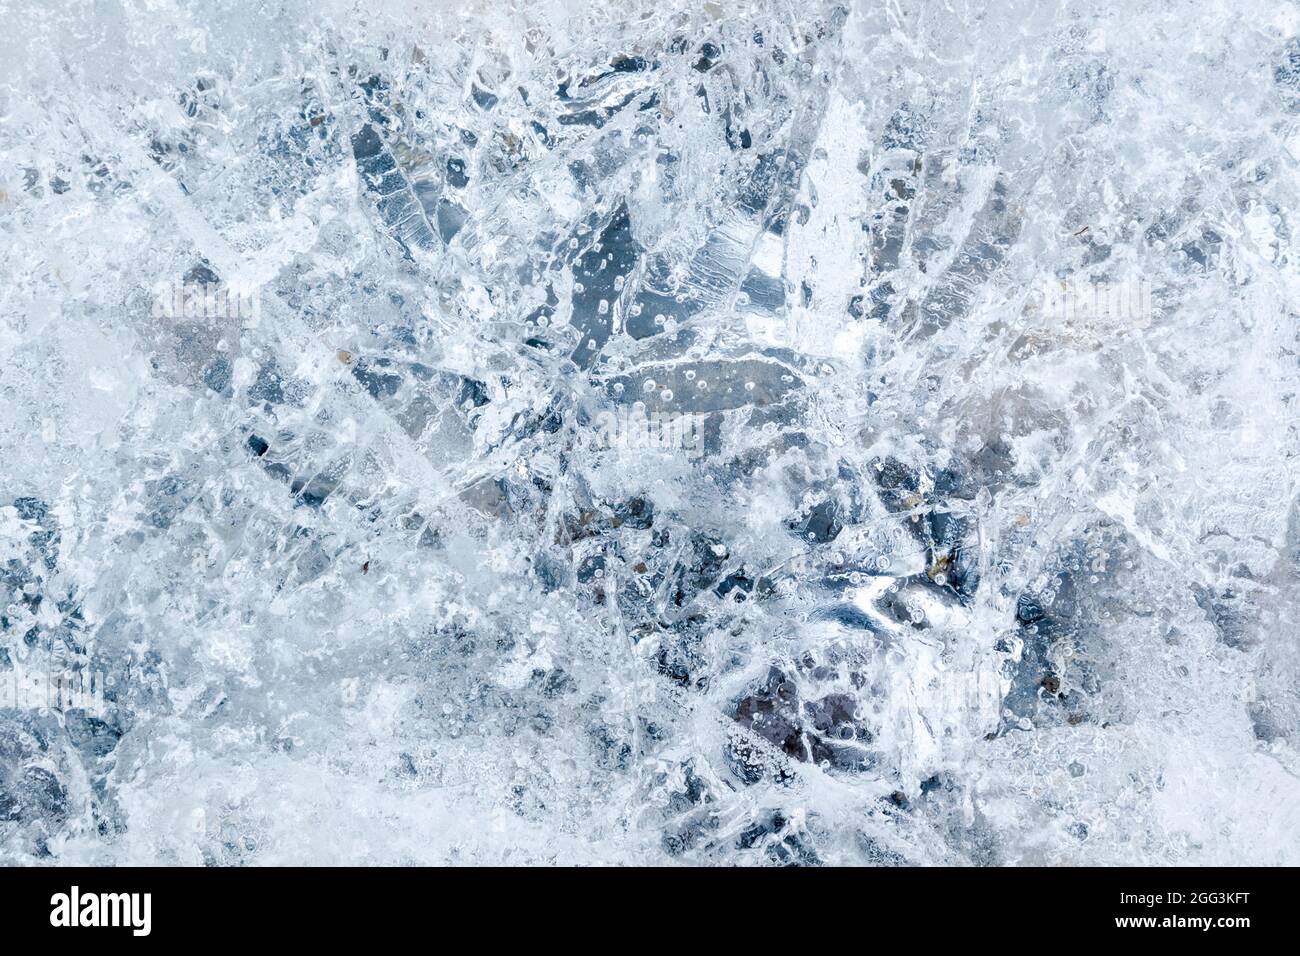 Ice encapsulating small stones and air bubbles, creating a highly textured effect Stock Photo